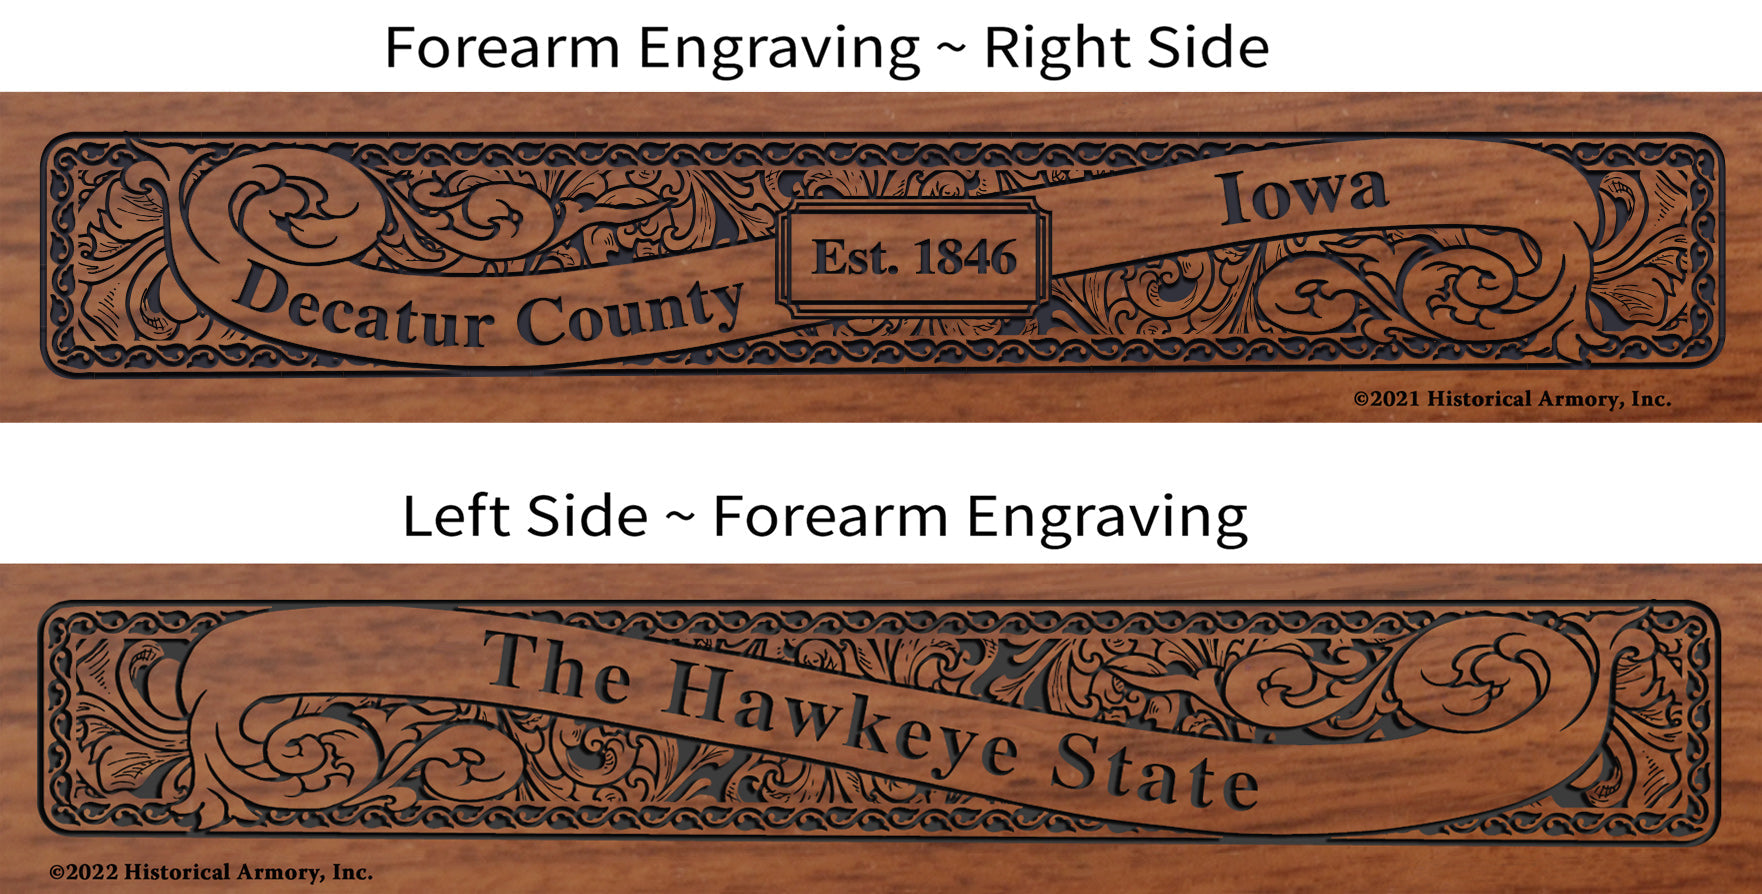 Decatur County Iowa Engraved Rifle Forearm